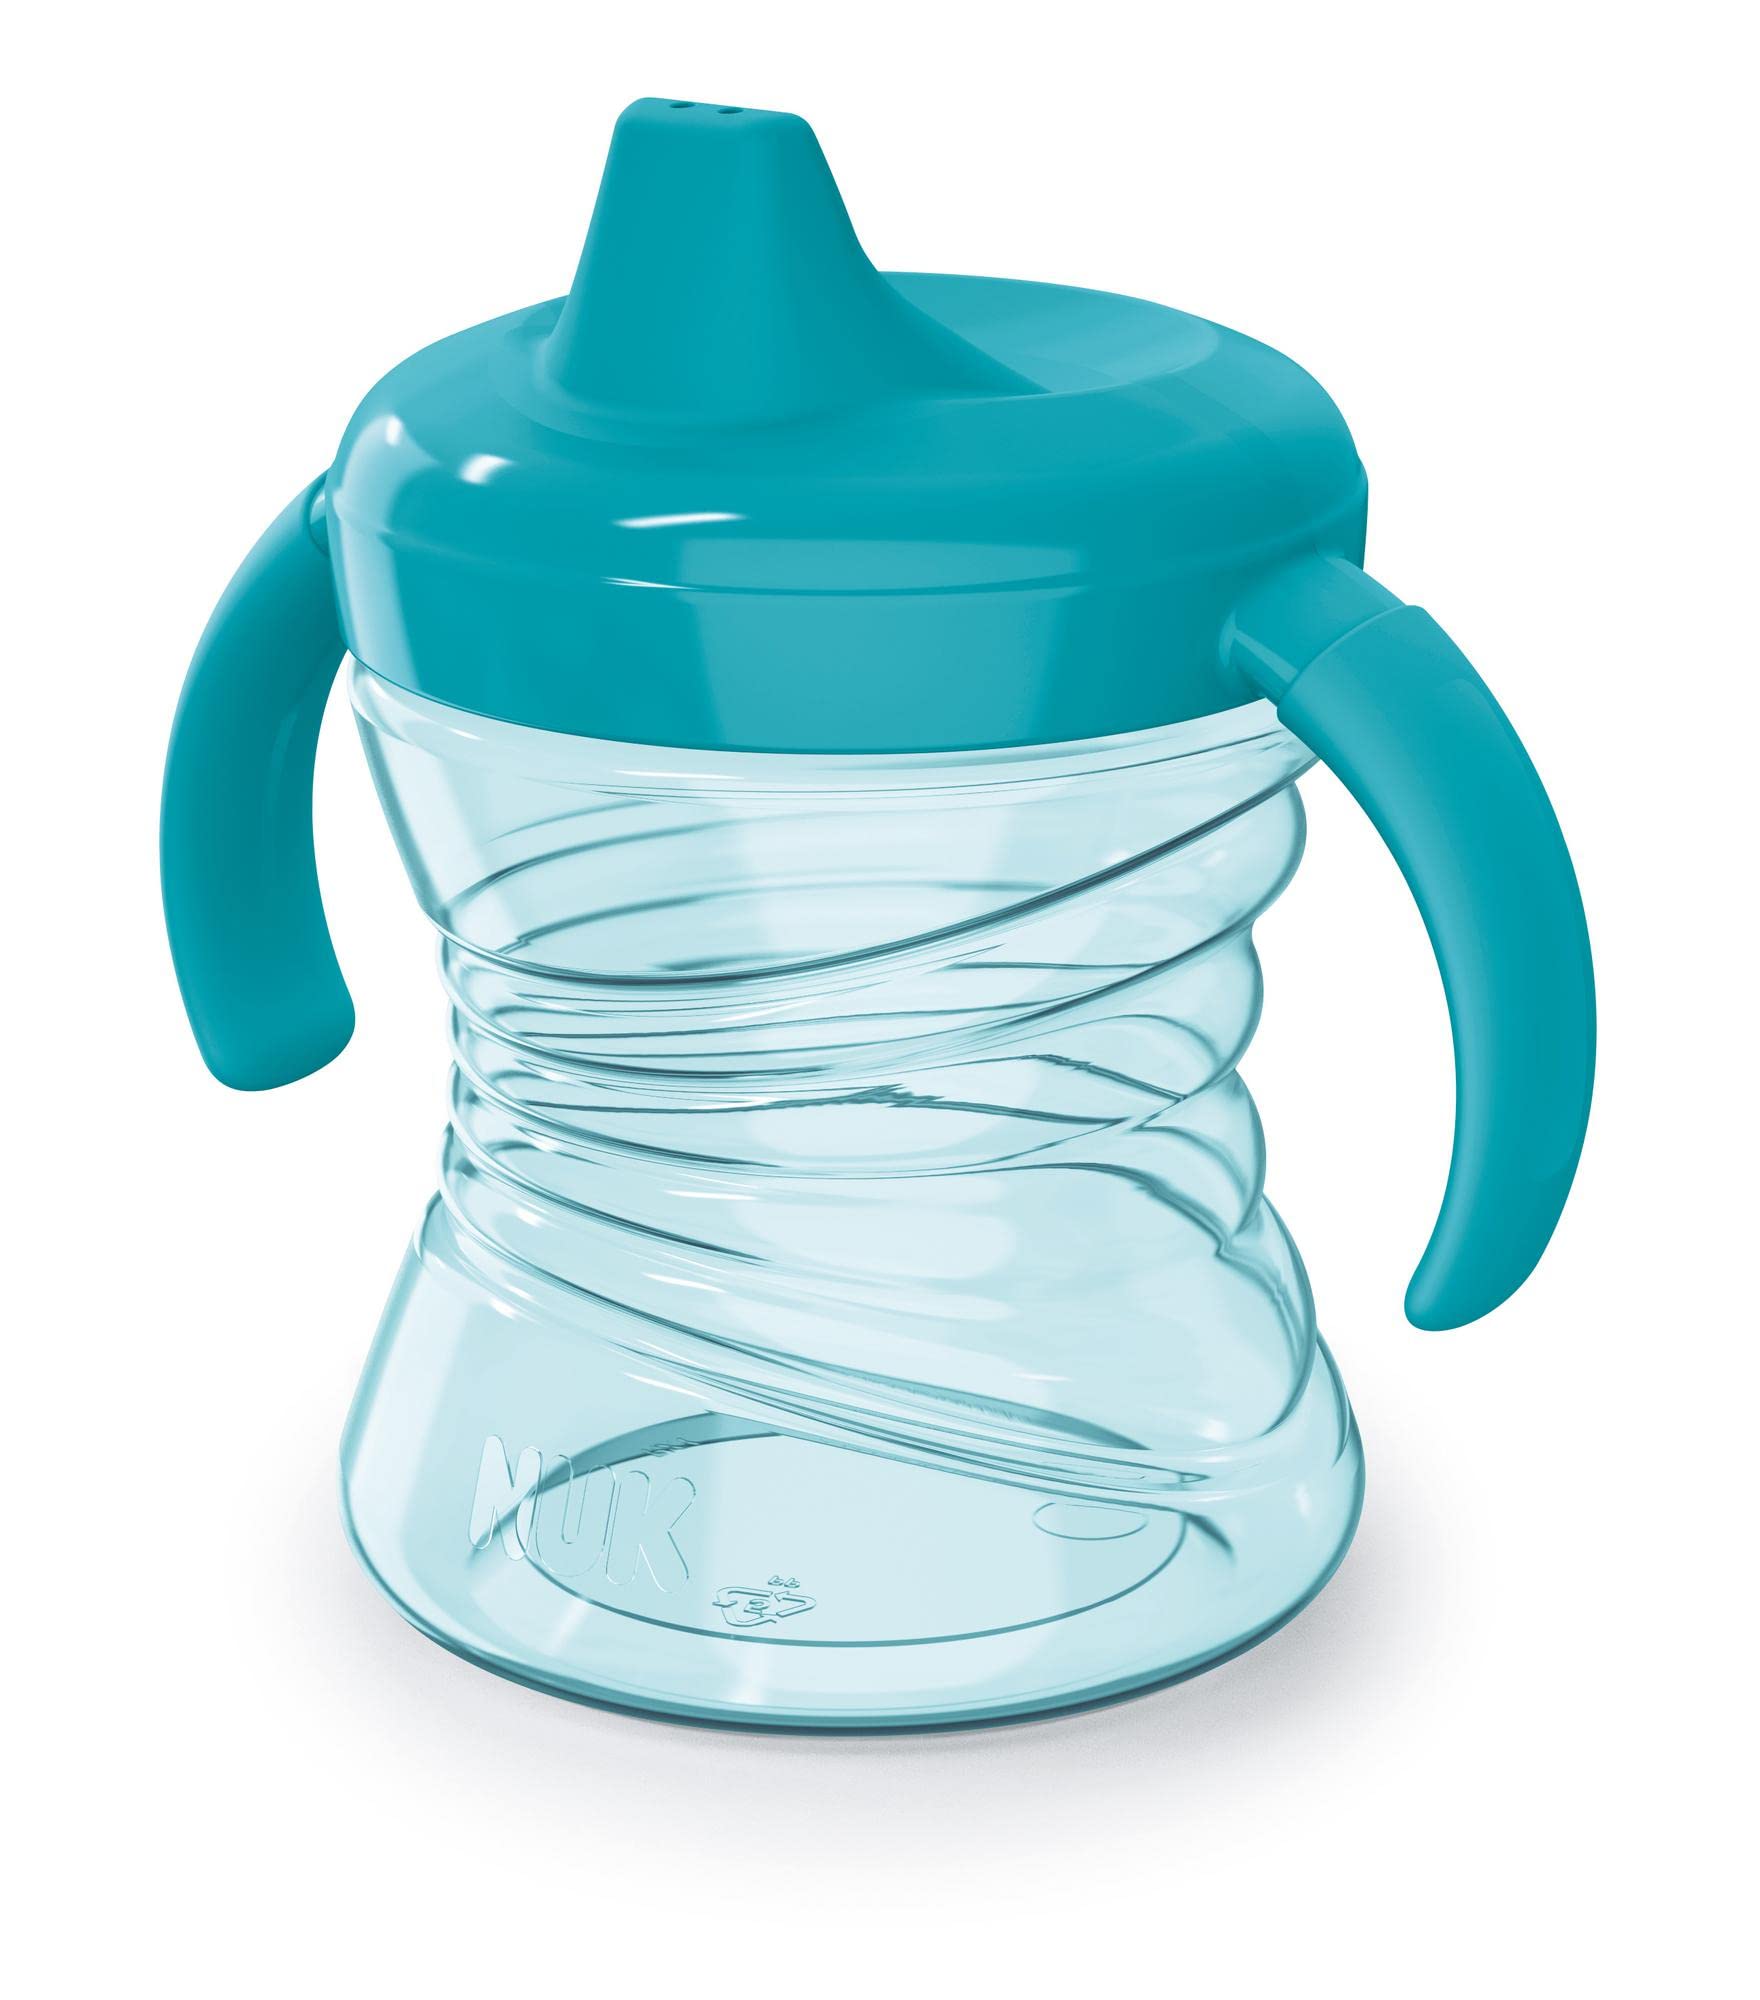 First Essentials By NUK Fun Grips 2-Handle Trainer Soft Spout Sippy Cup, 7 oz